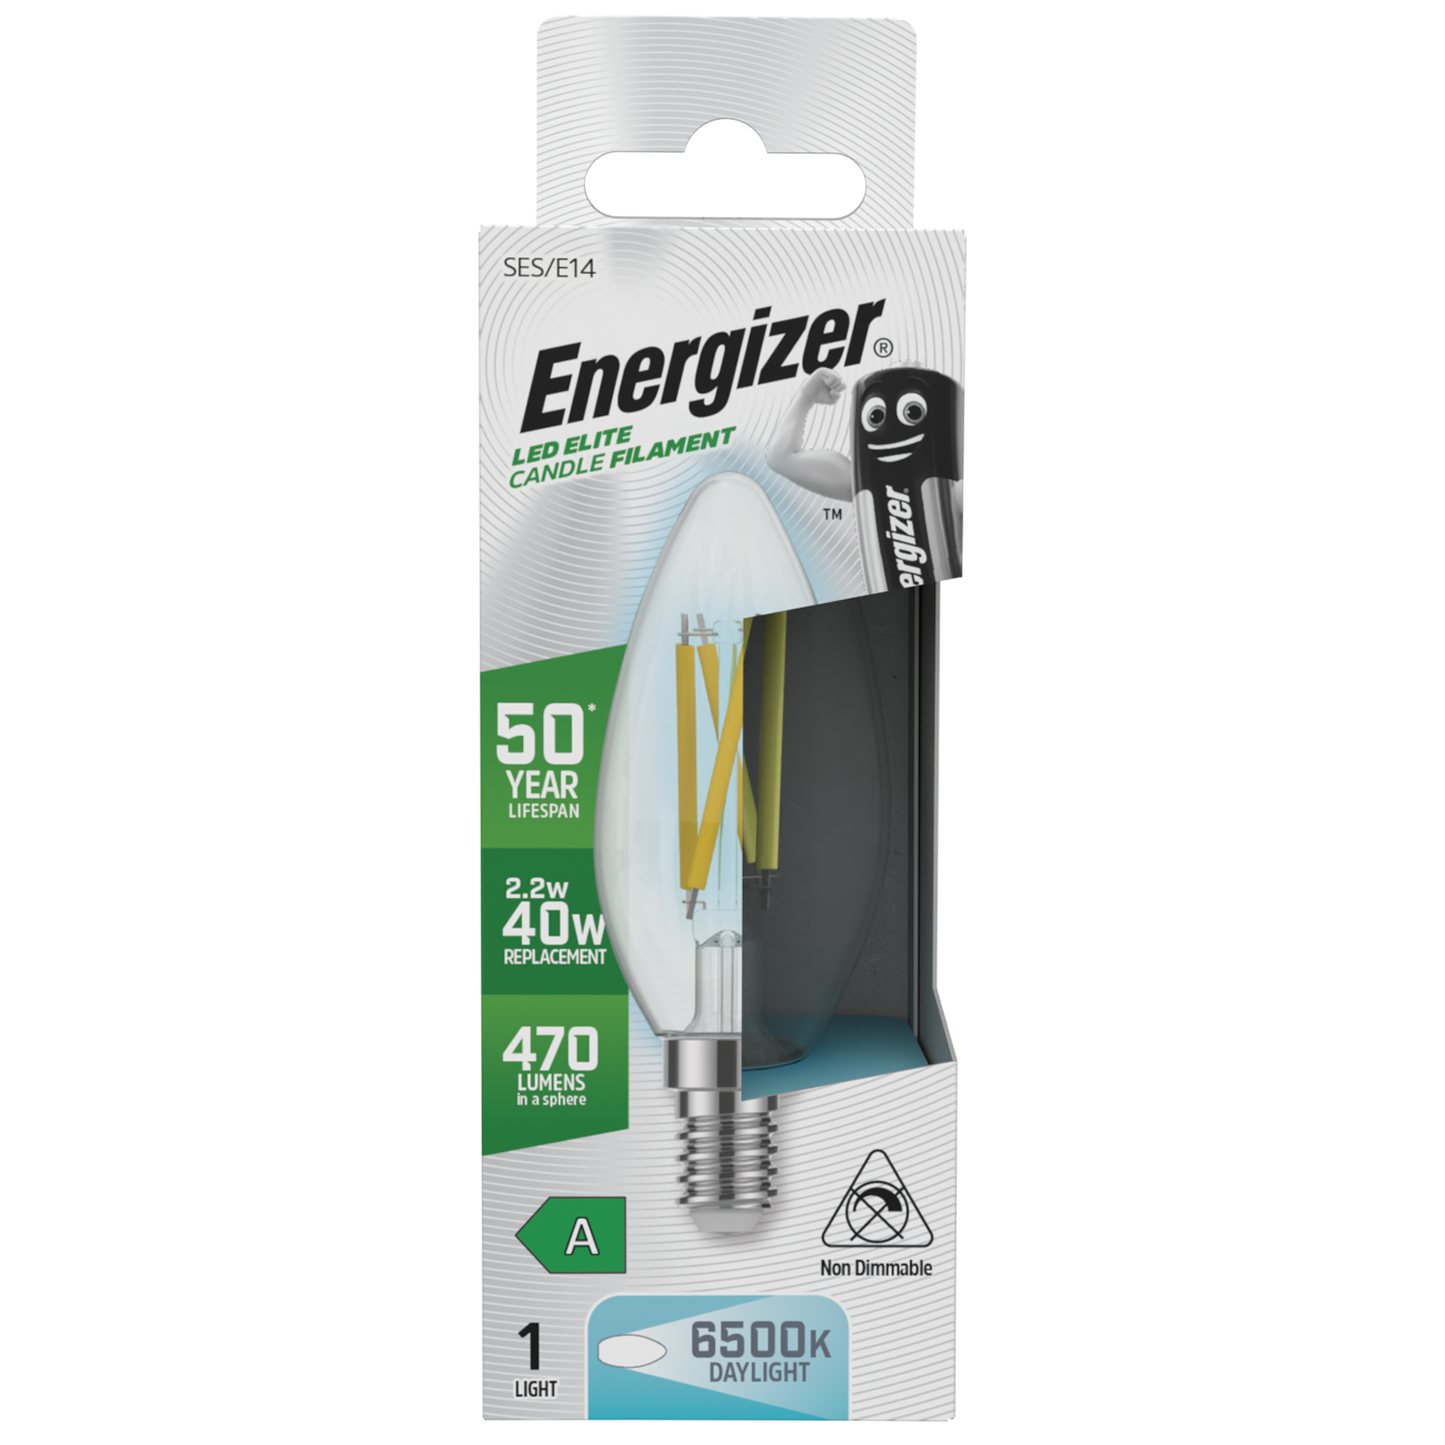 S29641 Energizer A Rated LED Elite Candle E14 Filament 470lm 2.2W 6500K (Daylight) - Box of 1